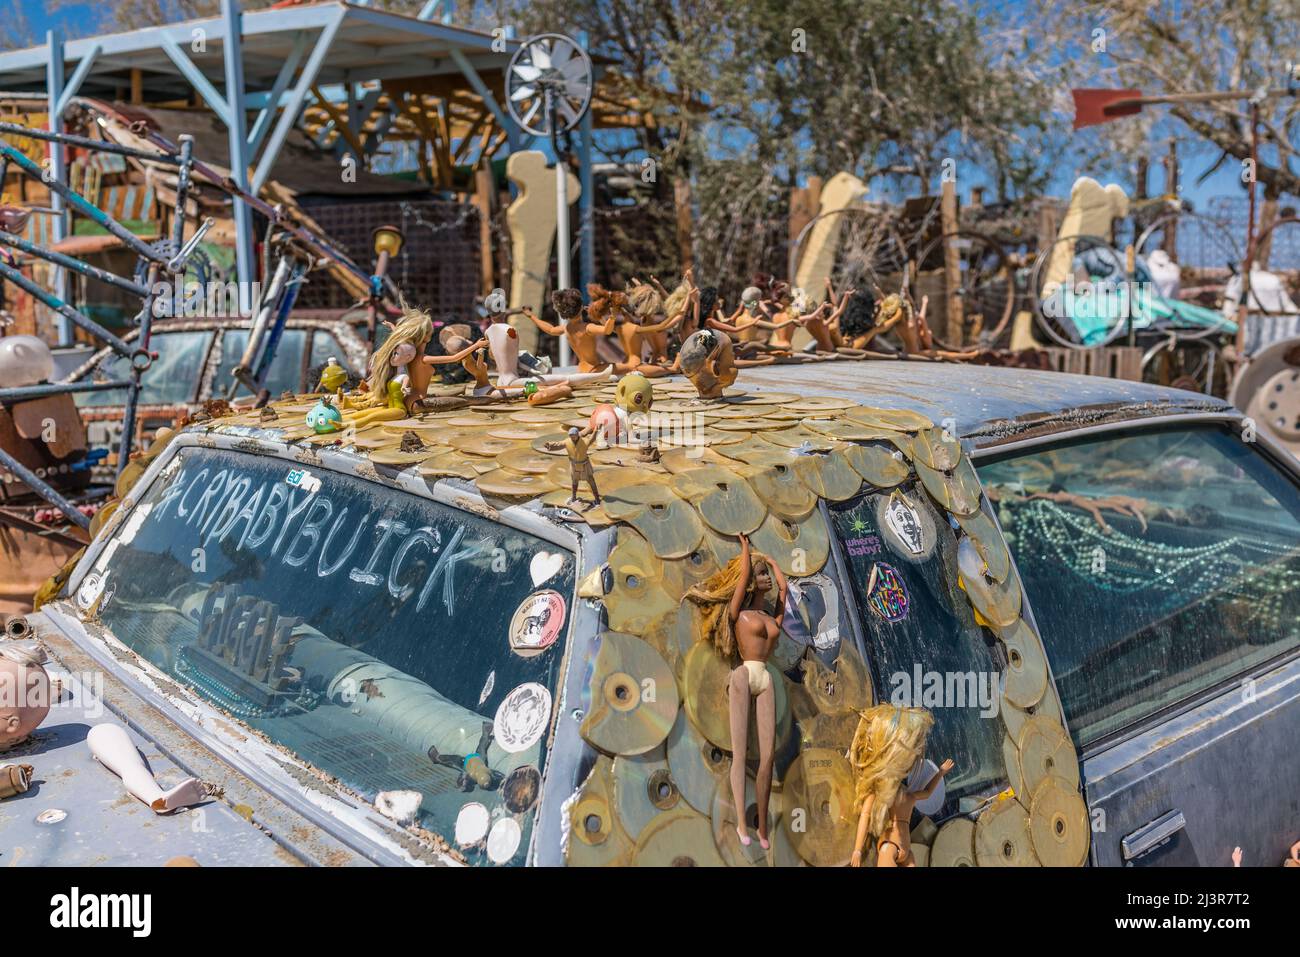 'Cry Baby Buick' is an art installation on an old Buick car covered with Barbie dolls, CDs, and miscellaneous stuff in the off the grid settlement of Stock Photo